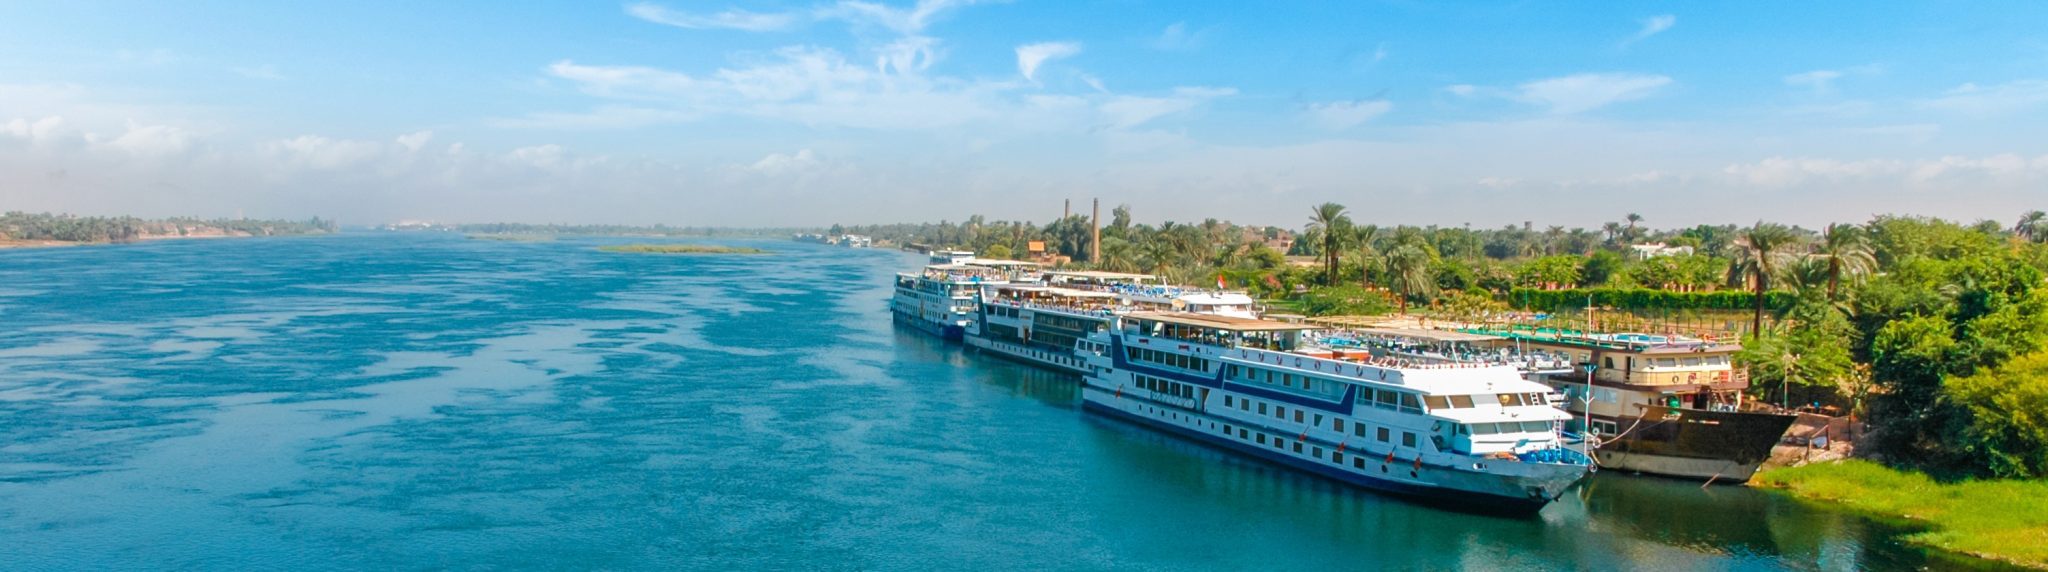 egypt & jordan discovered by nile cruise